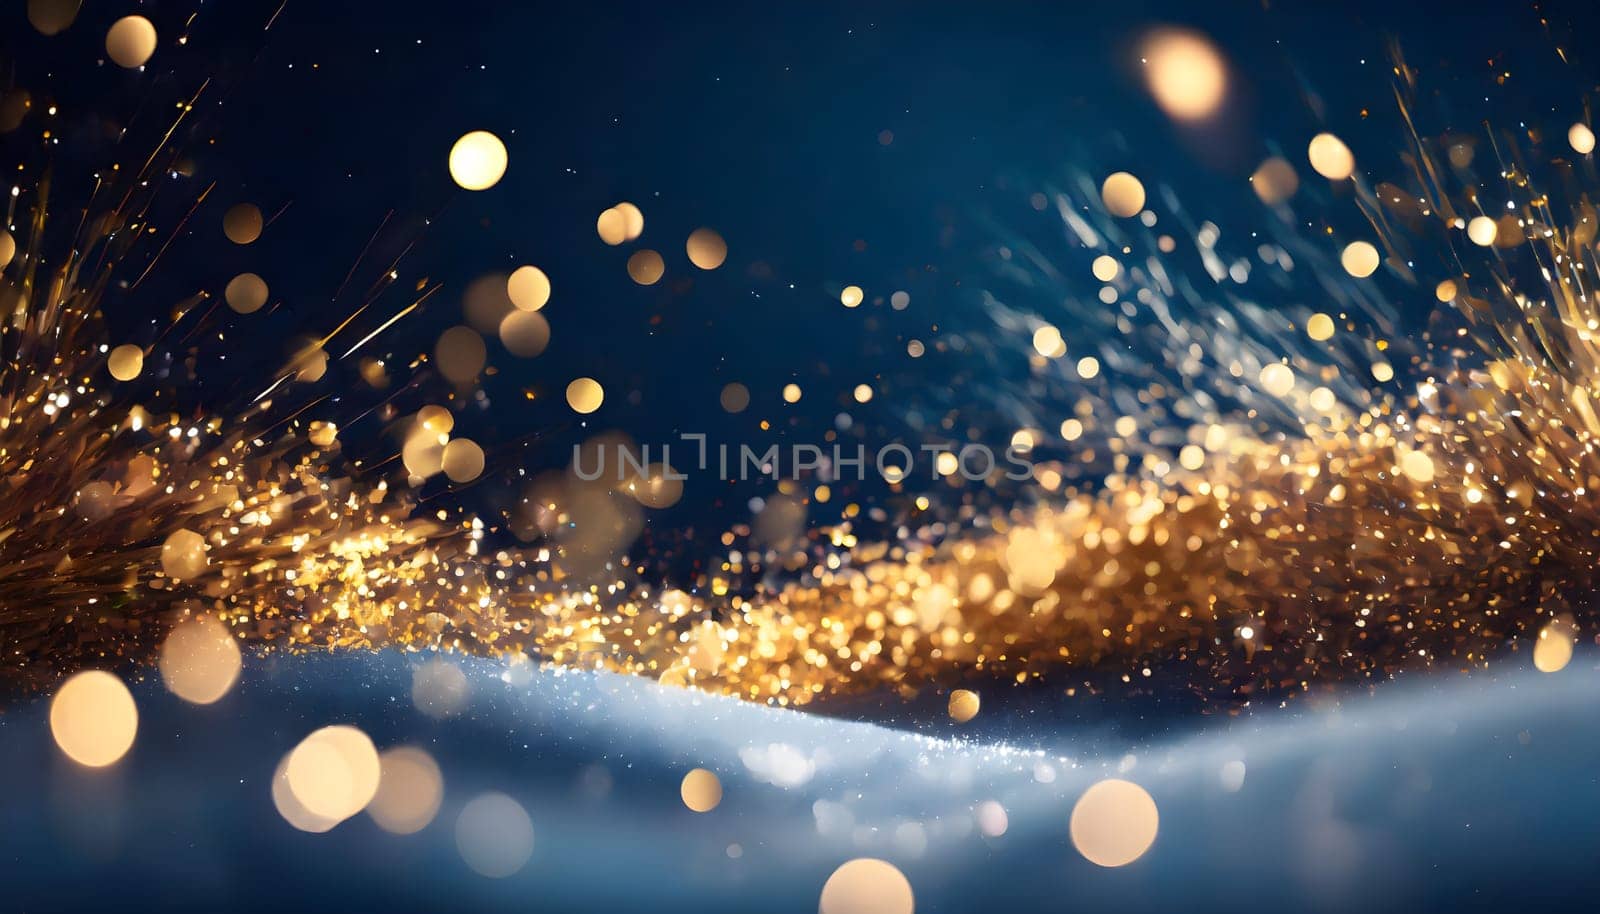 A stunning winter wonderland with golden particles dancing in the air, creating a mesmerizing bokeh effect against a deep navy background c